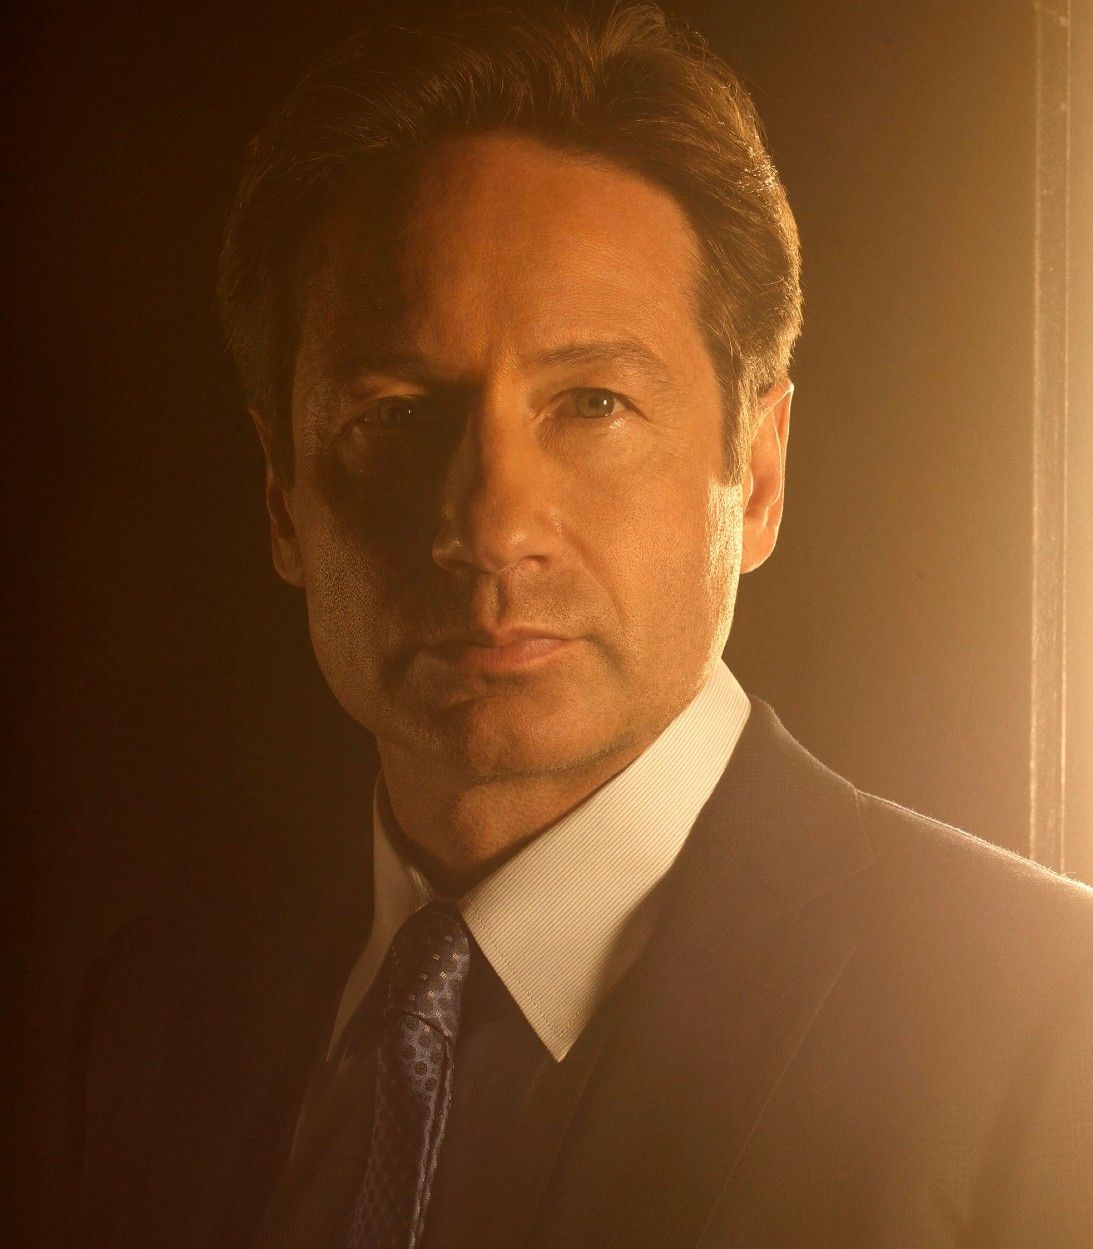 David Duchovny in The X-Files Revival